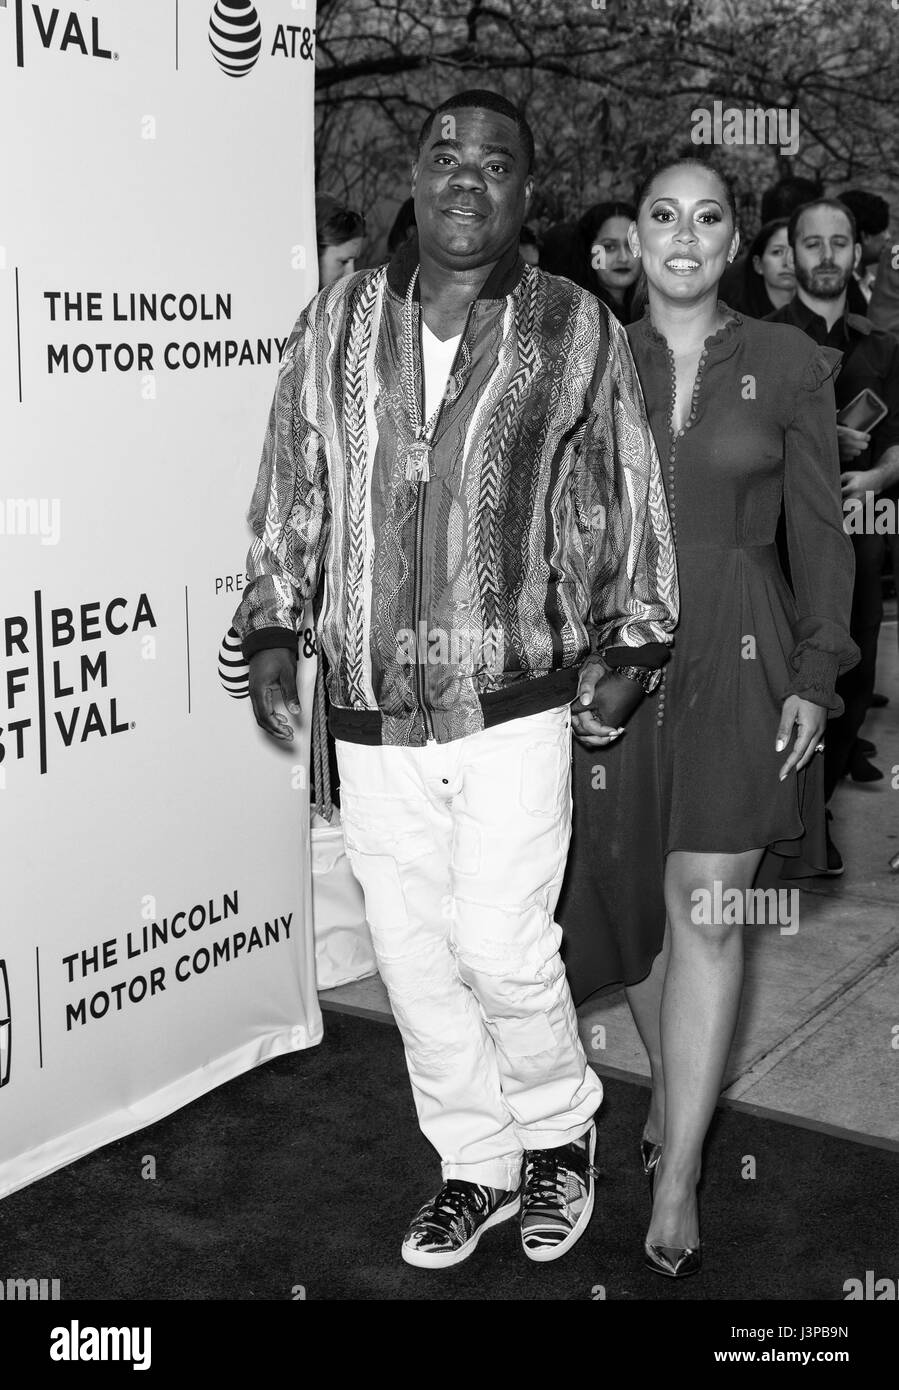 NEW YORK, NY - APRIL 23, 2017: Megan Wollover and Tracy Morgan attend 'The Clapper' Premiere during the 2017 Tribeca Film Festival at SVA Theatre Stock Photo